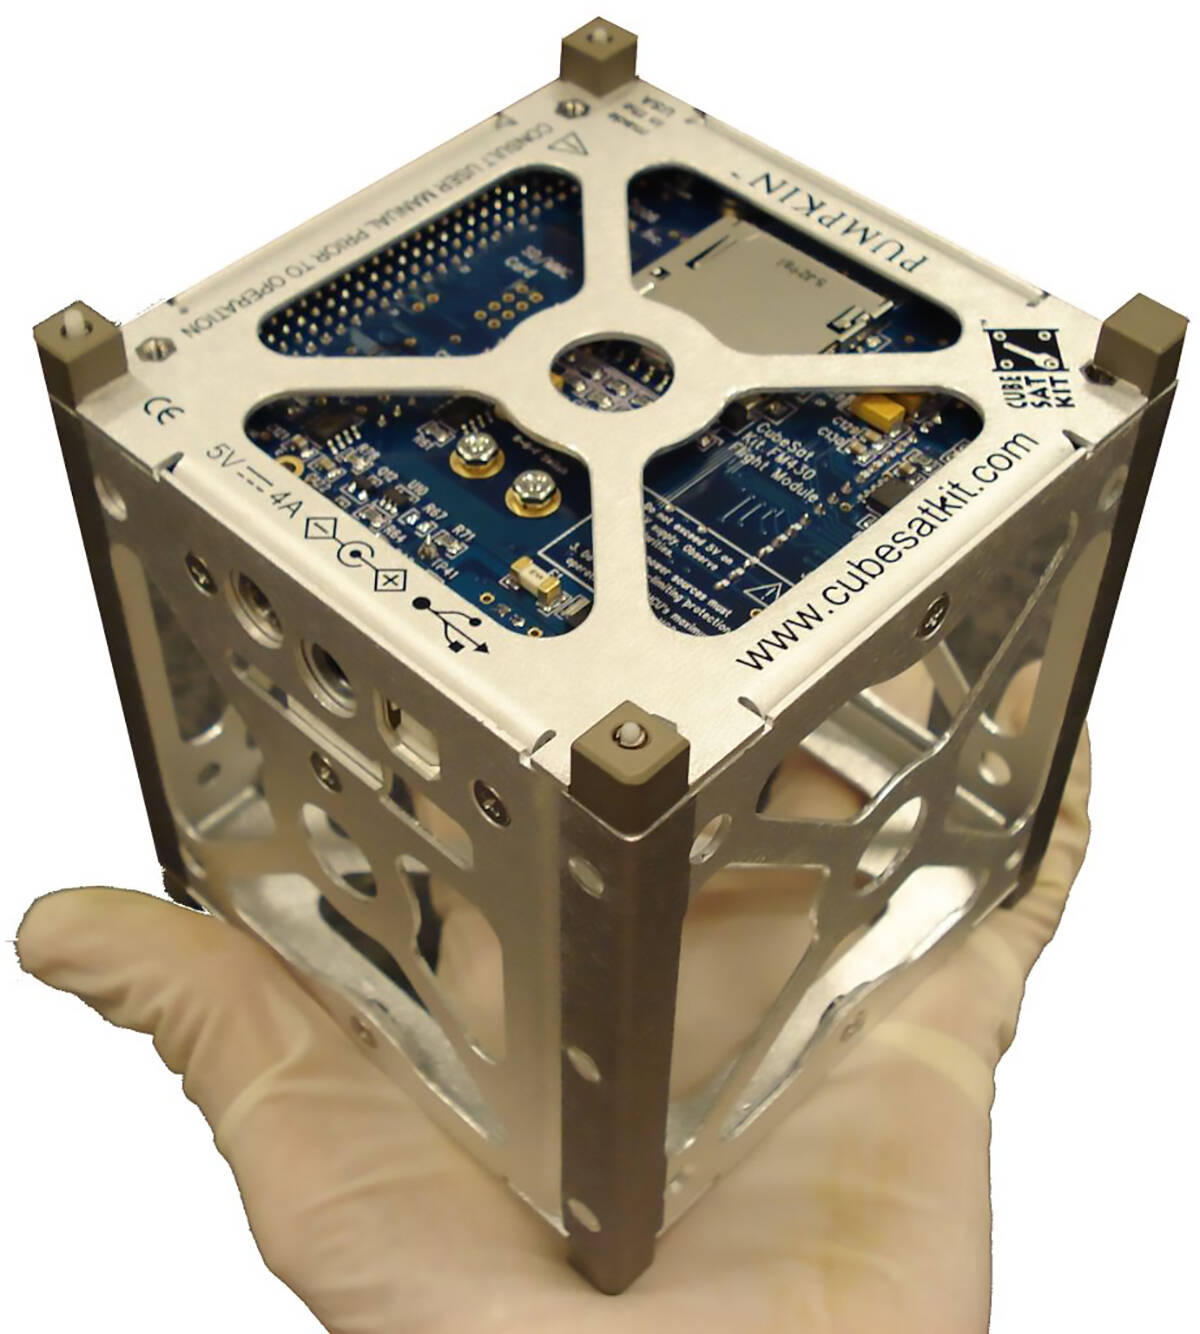                                             A CubeSAT sits in the palm of someone’s hand. Photo courtesy of European Space Agency          